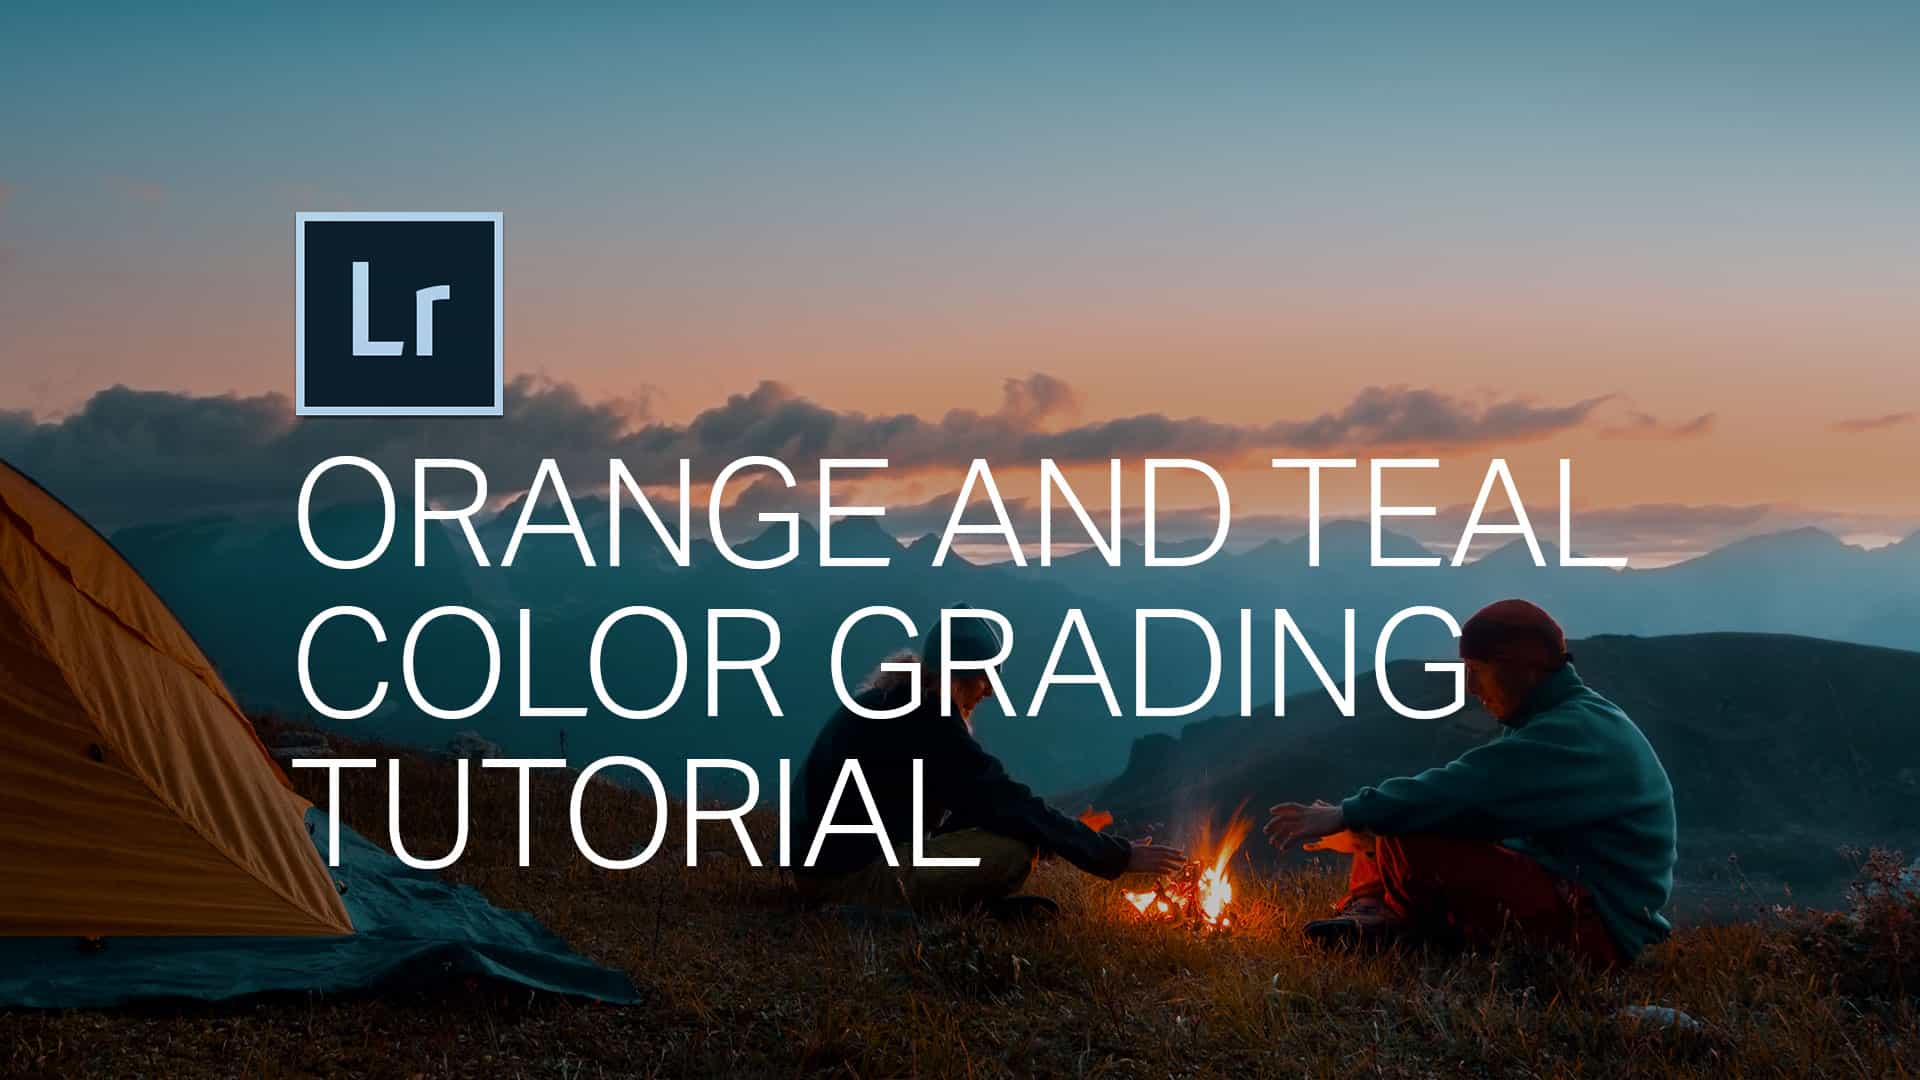 How to Create the Orange and Teal Look in Lightroom